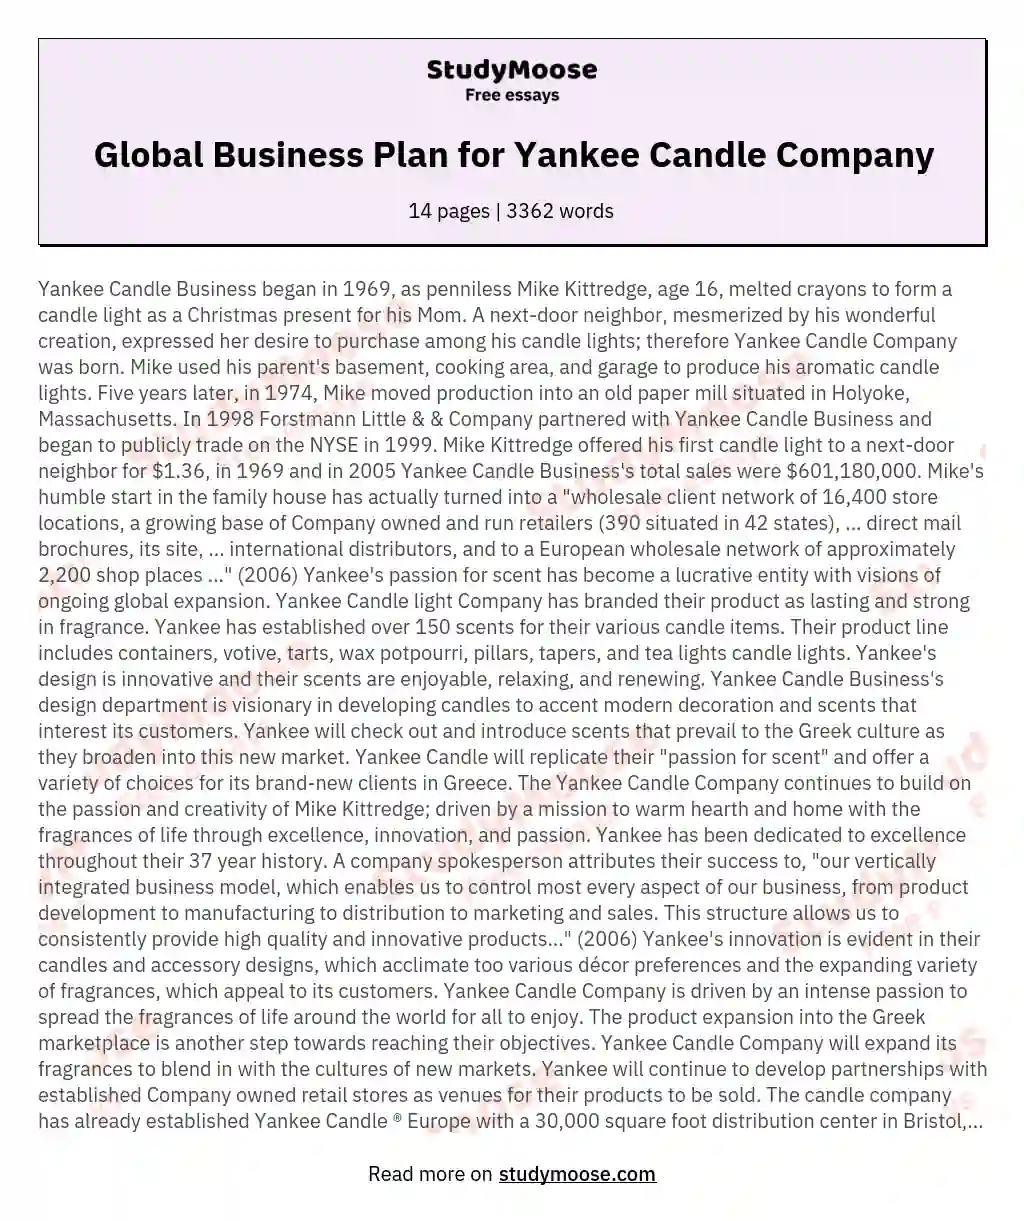 Global Business Plan for Yankee Candle Company essay